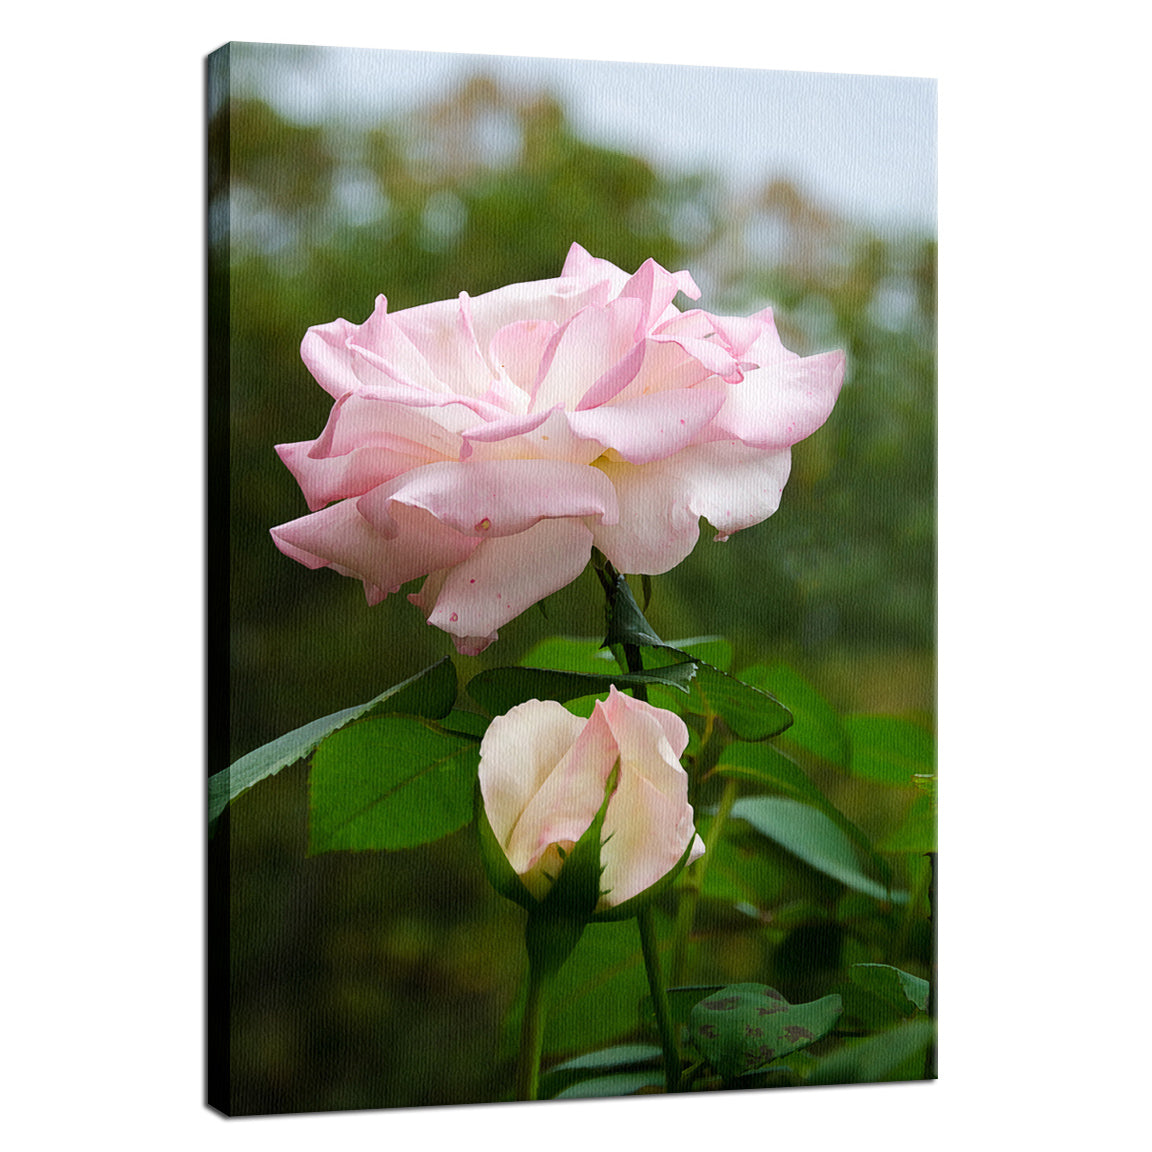 Flower Wall Frame Hanging: Admiration Nature / Floral Photo Fine Art Canvas Wall Art Prints  - PIPAFINEART